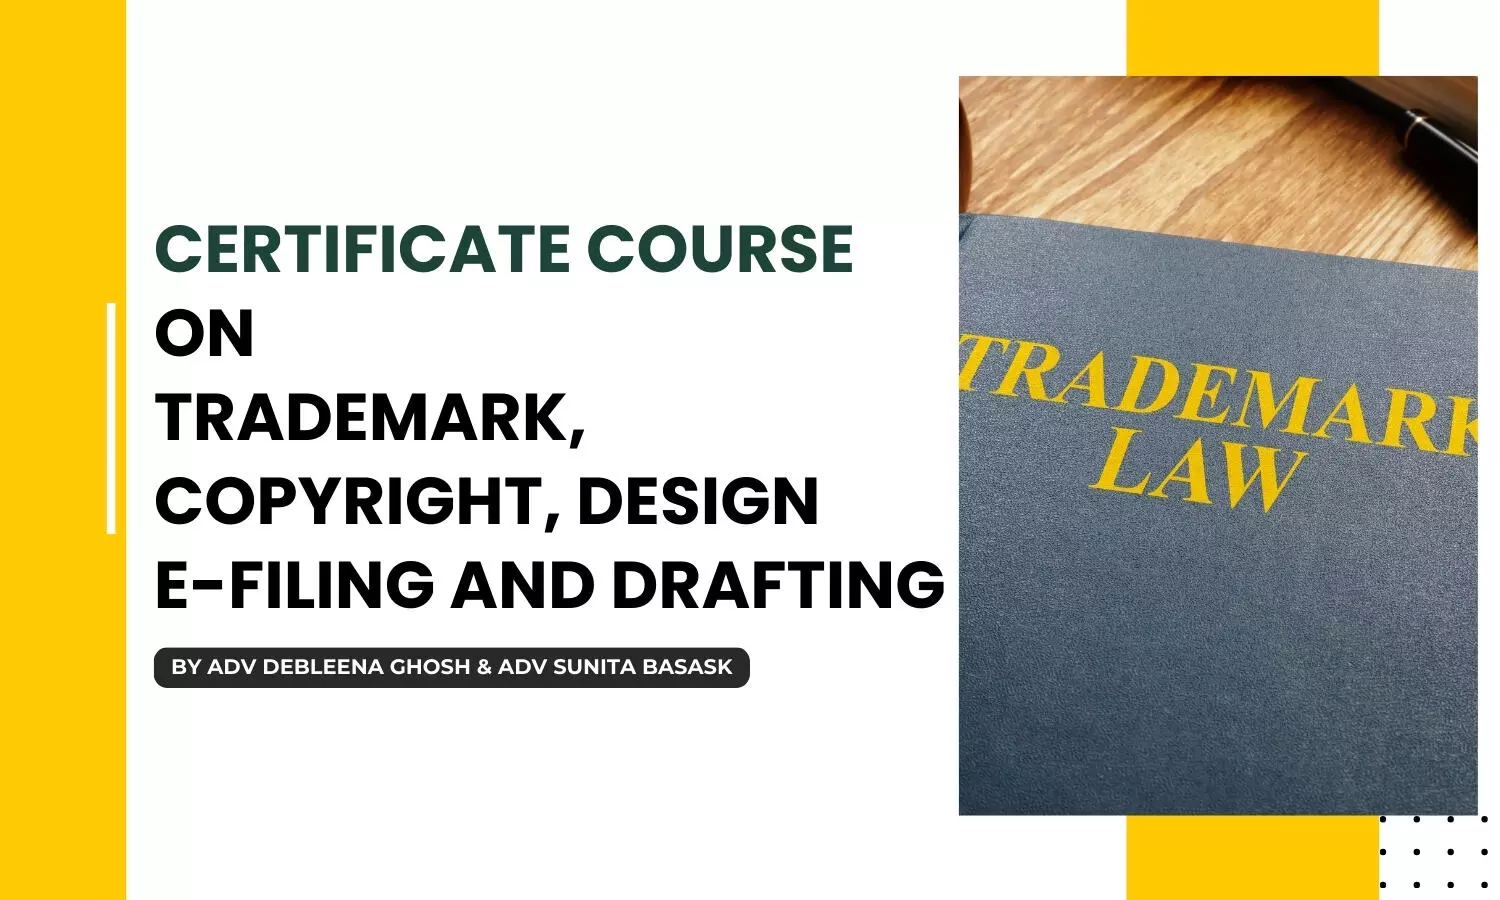 Certificate Course on Trademark, Copyright, Design E-filing and Drafting